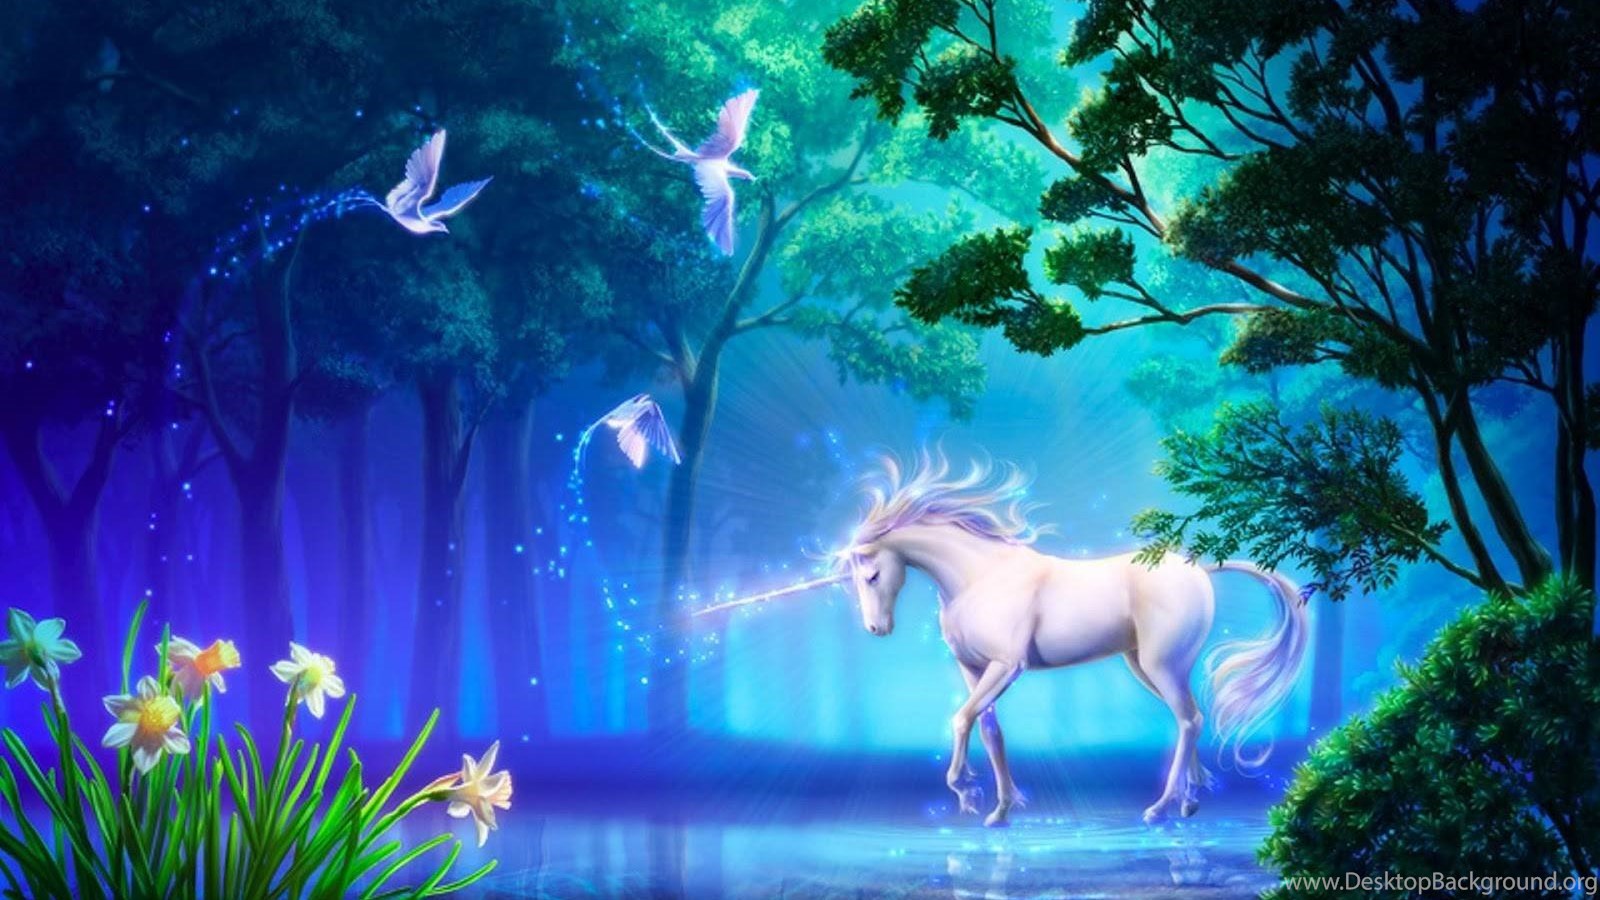 Unicorn And Magic Birds Mythical Creatures Wallpaper Desktop Background